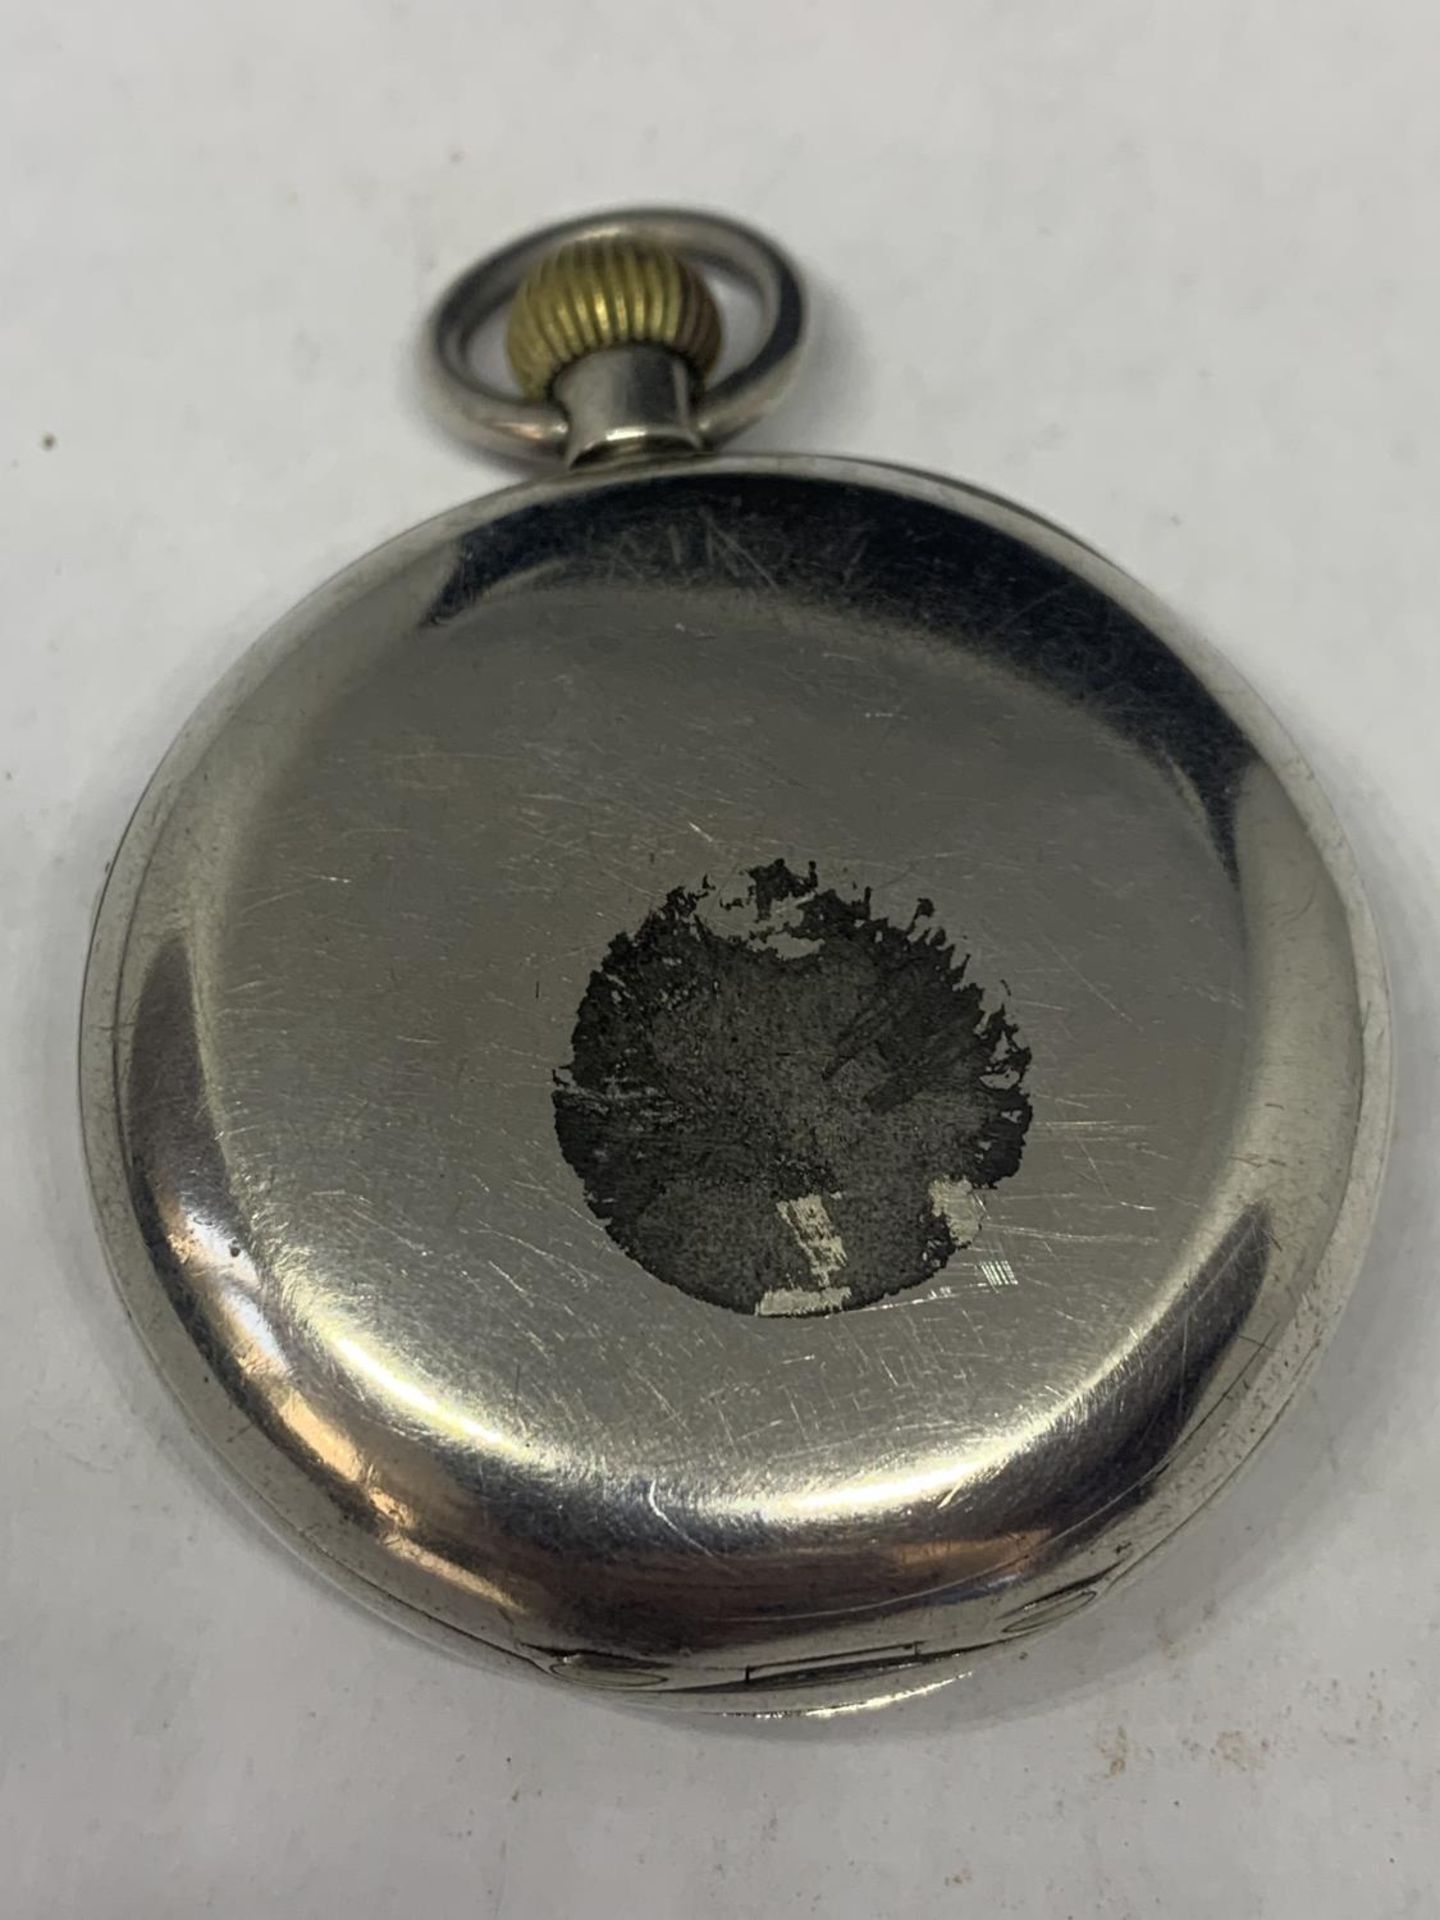 AN ANTIQUE .935 SILVER CHRONOMETRE POCKET WATCH - Image 3 of 5